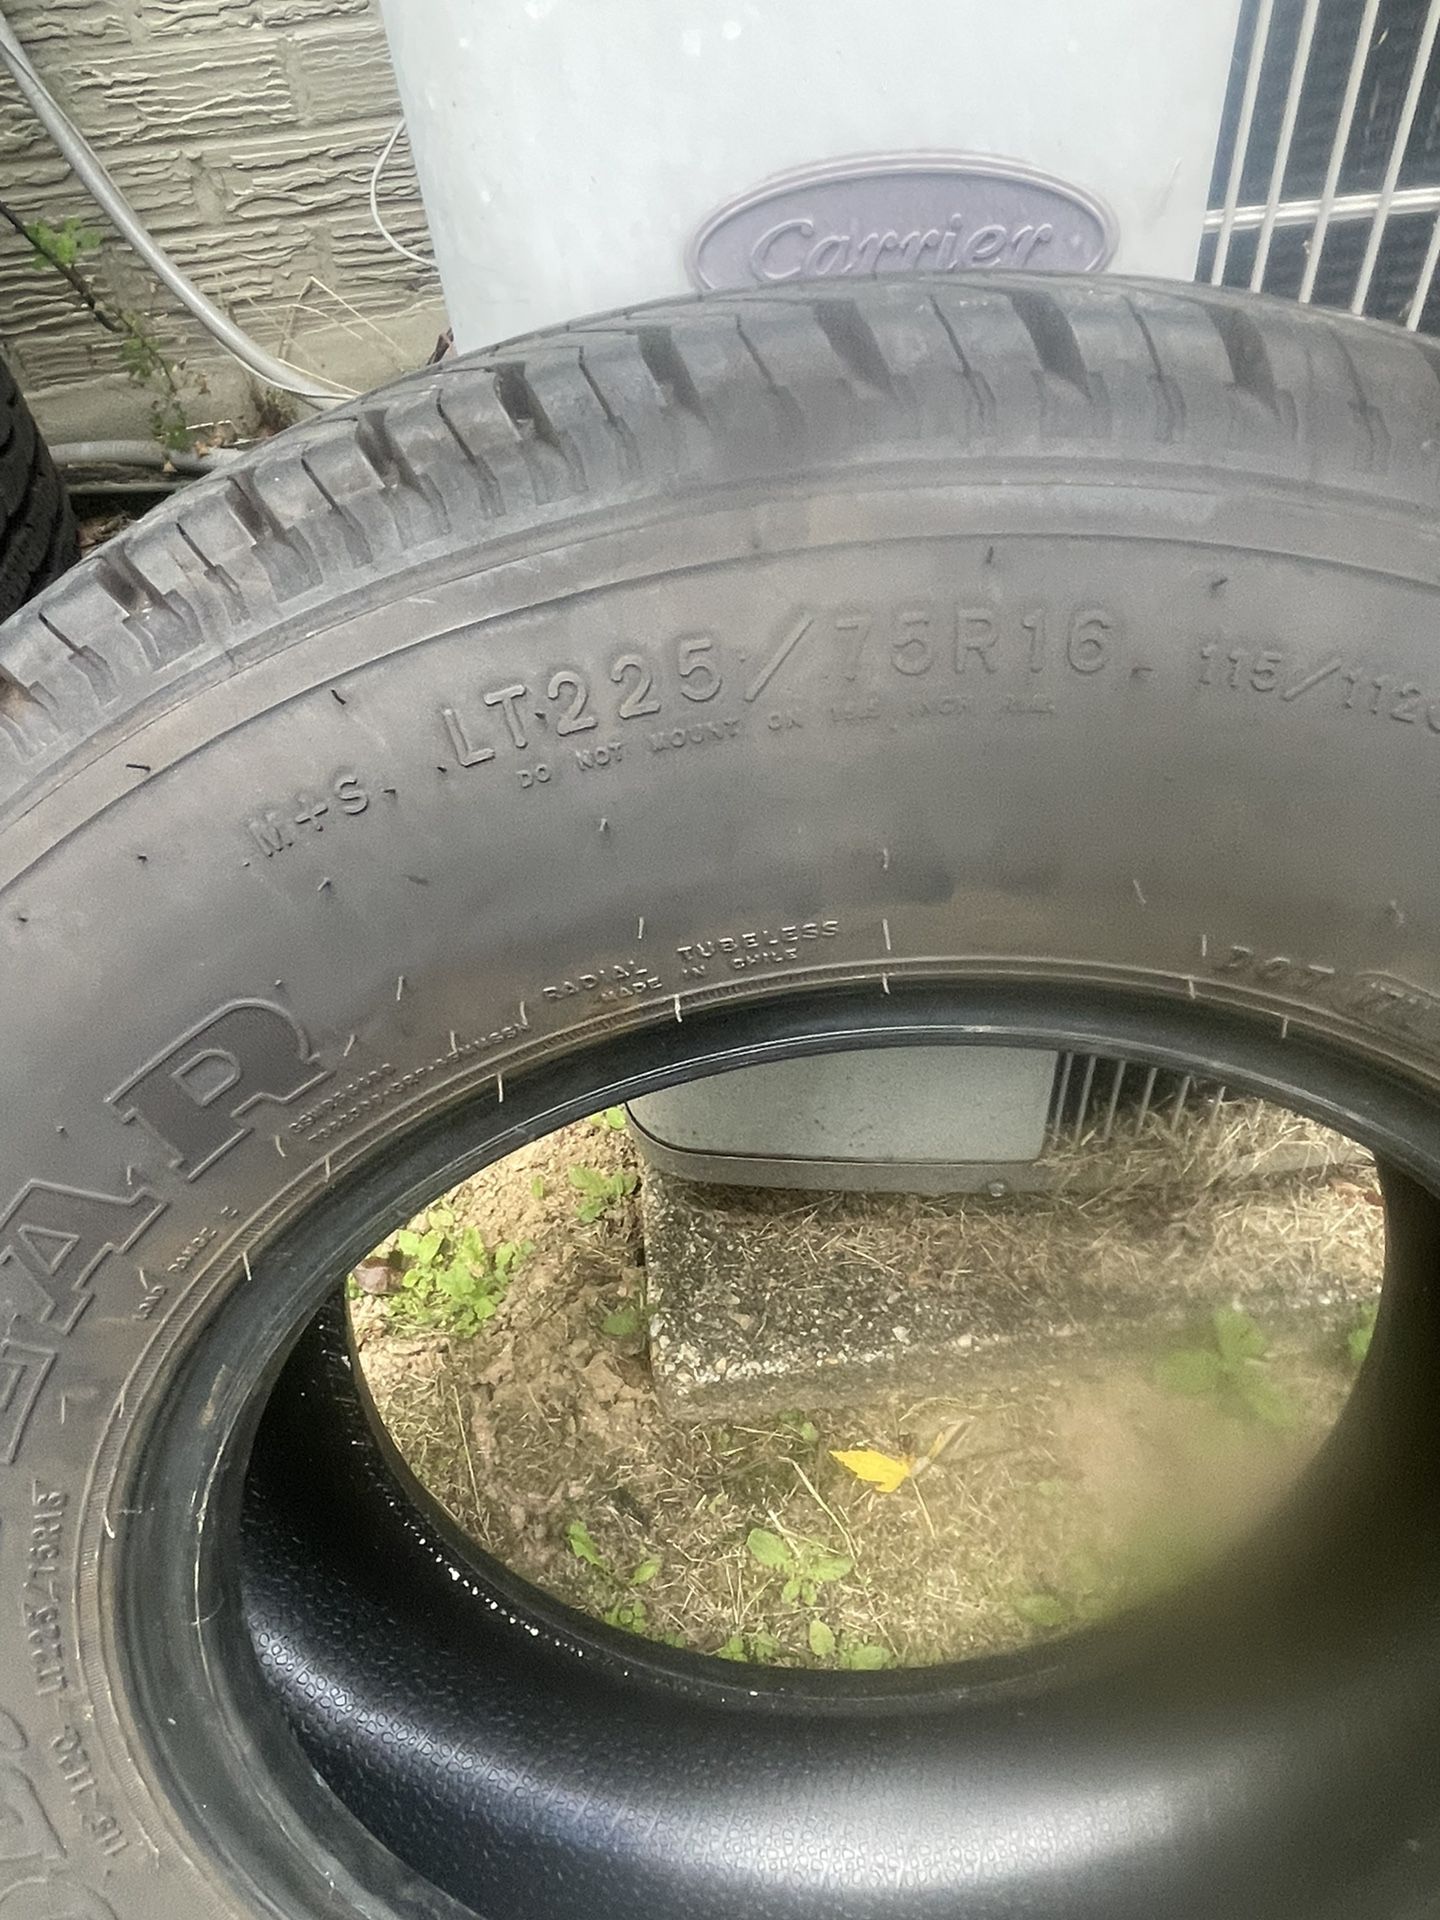 Used tire 